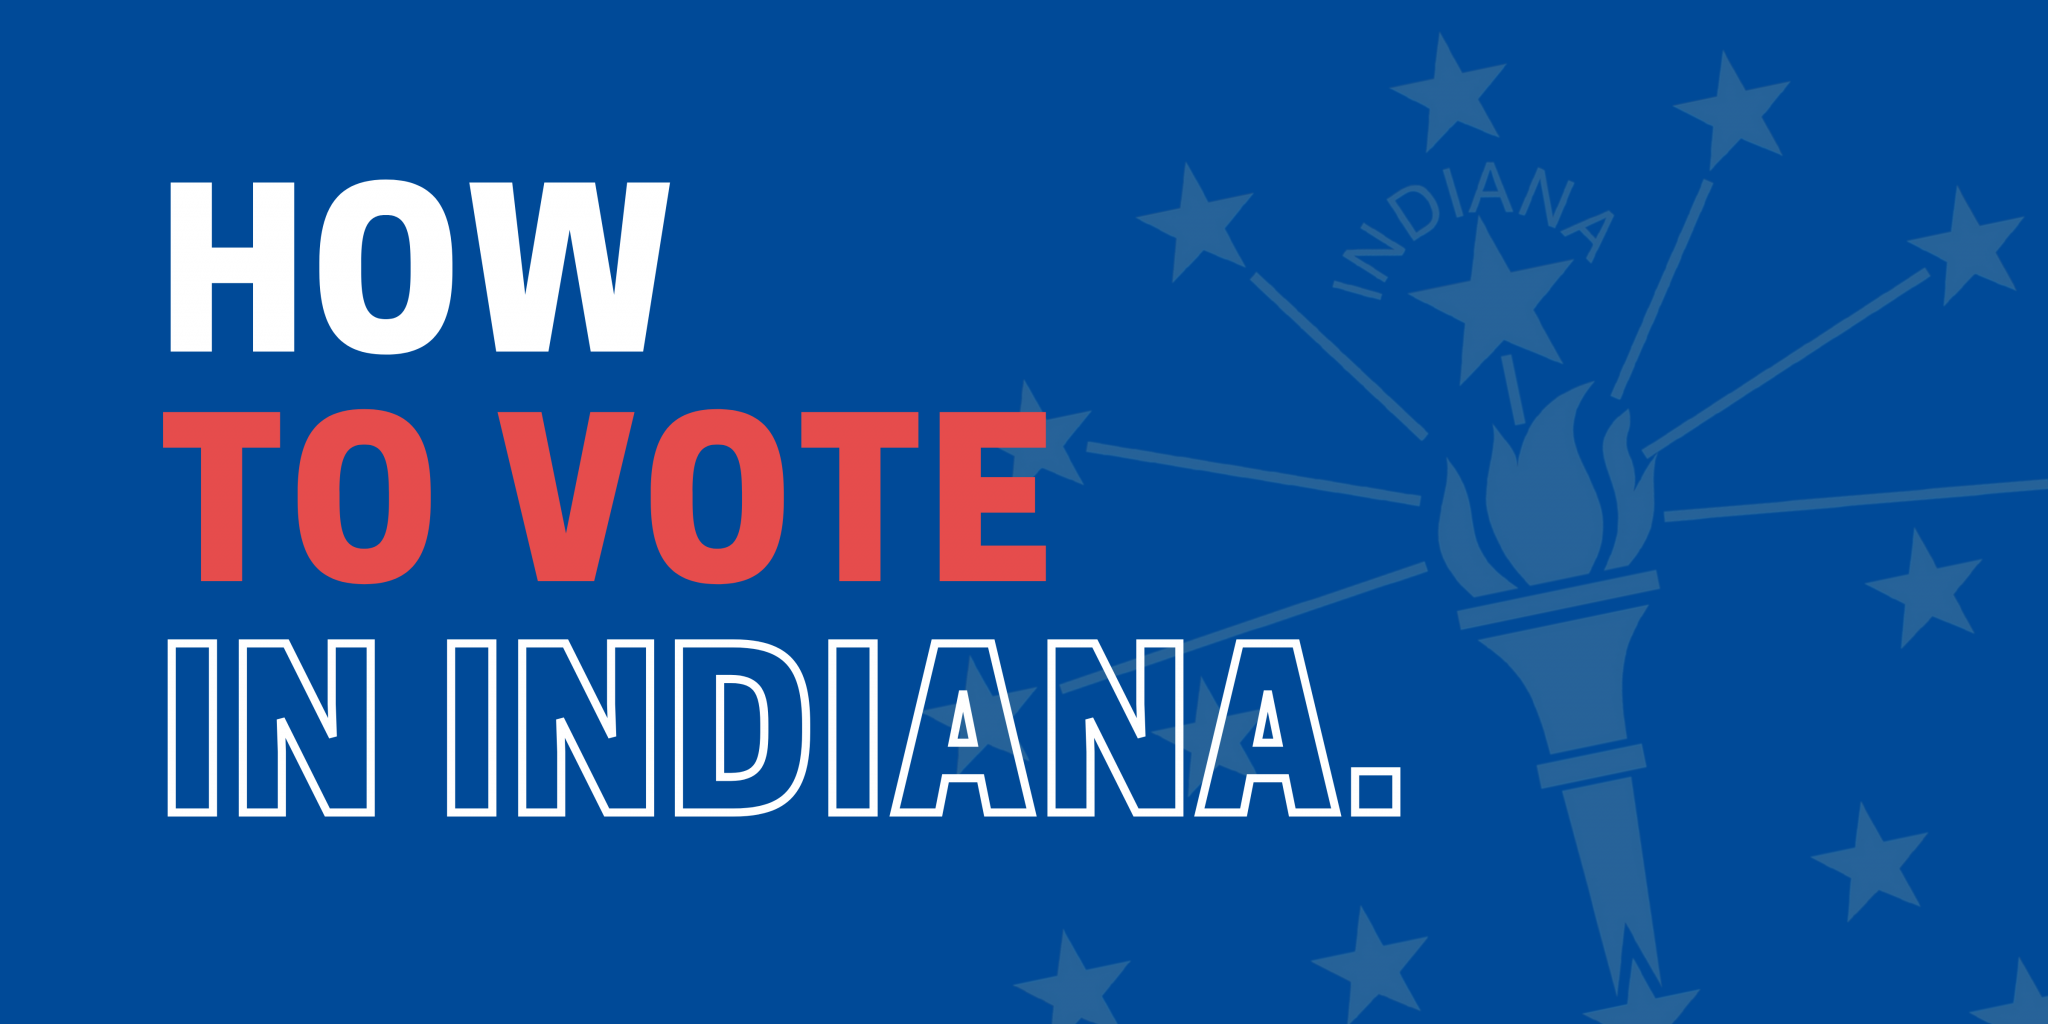 A Guide to Voting in 2020 When Where and How to Vote in Indiana large